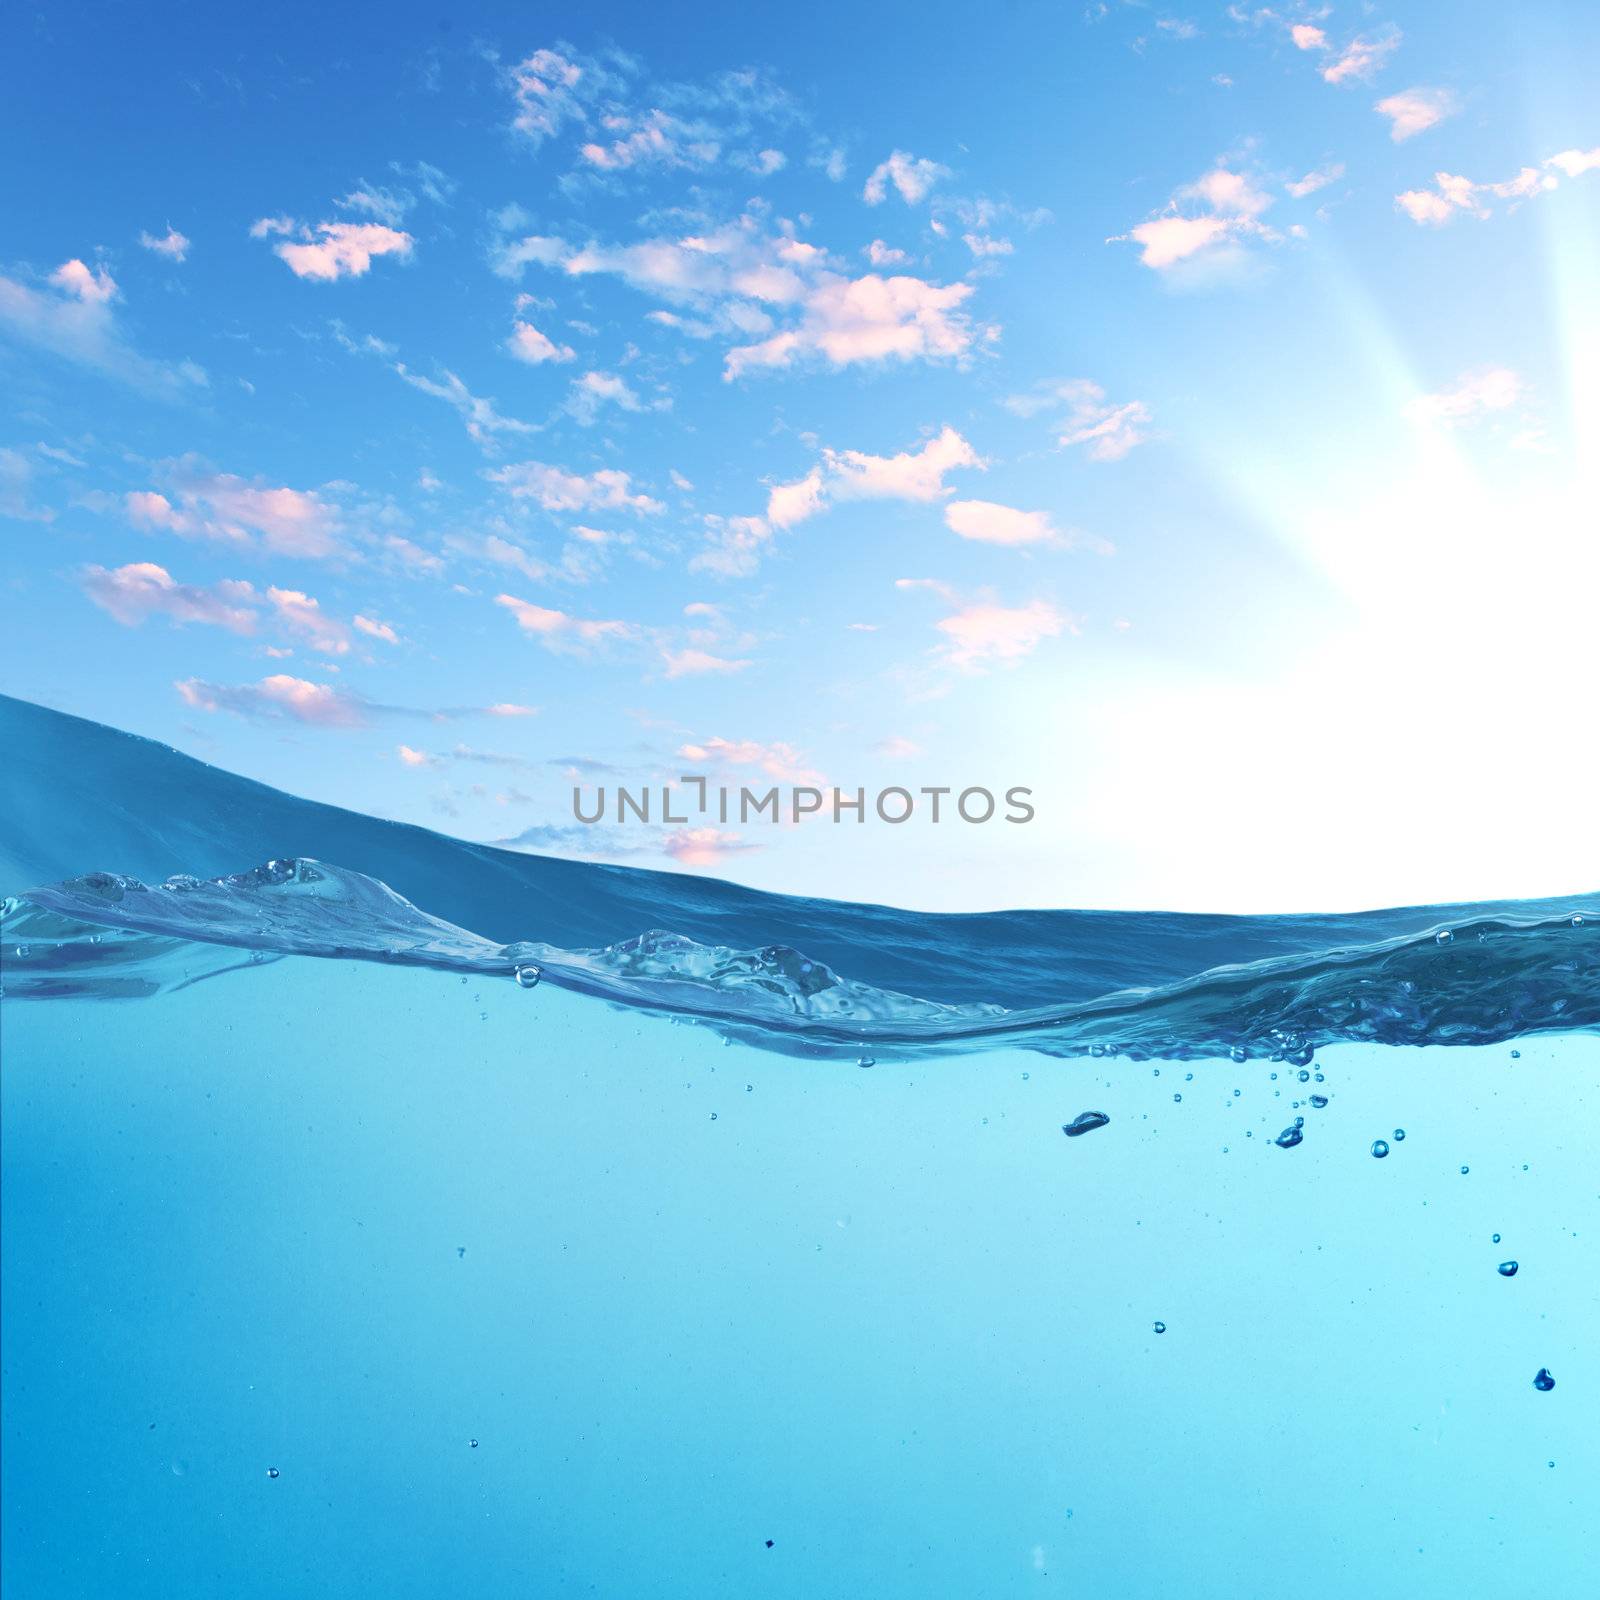 design template with underwater part and sunset skylight splitted by waterline